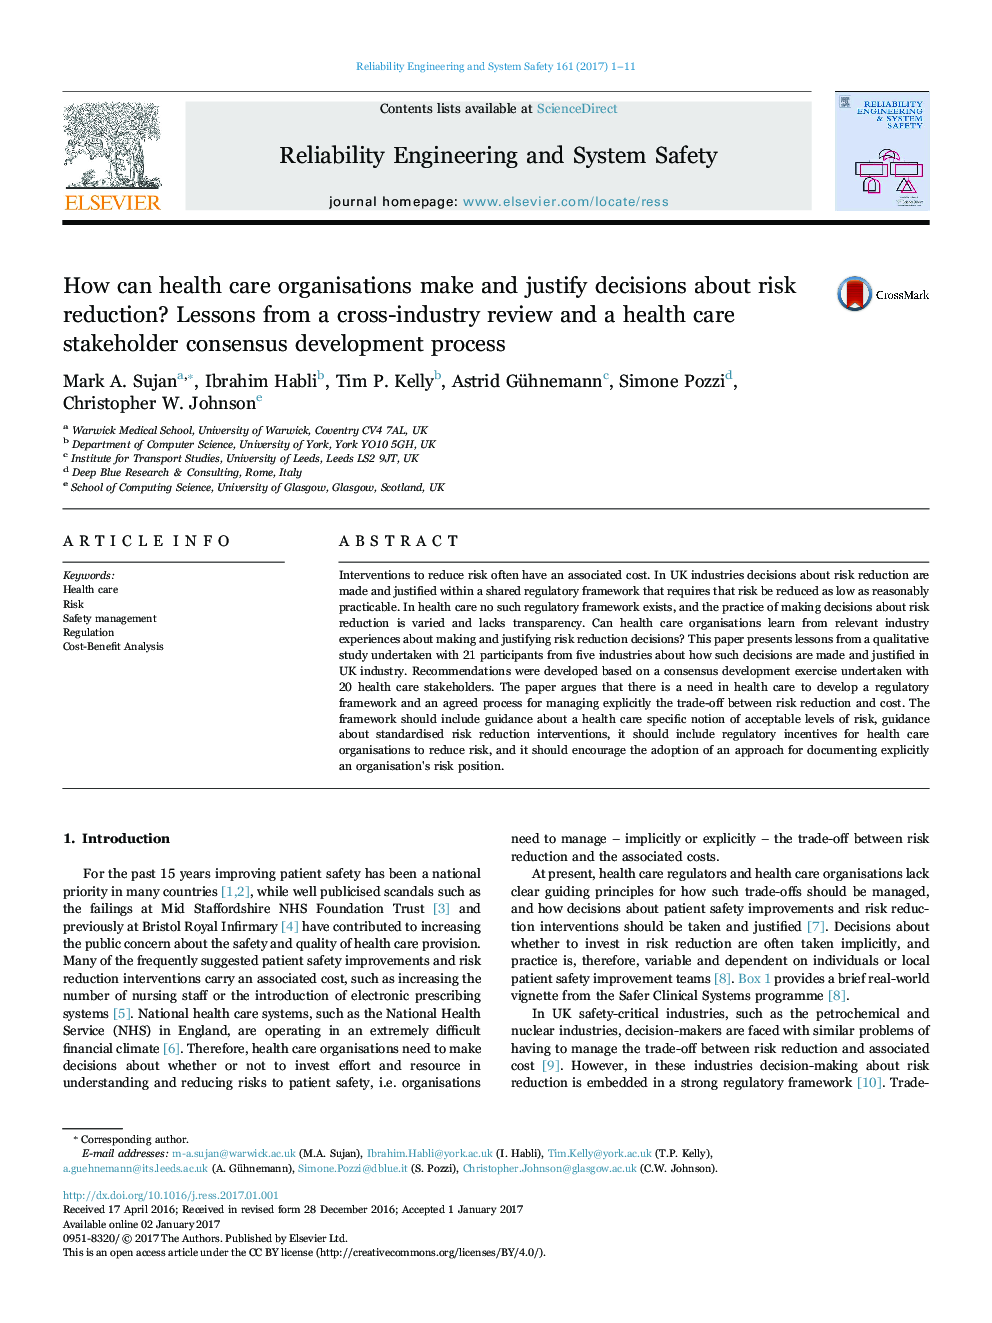 How can health care organisations make and justify decisions about risk reduction? Lessons from a cross-industry review and a health care stakeholder consensus development process